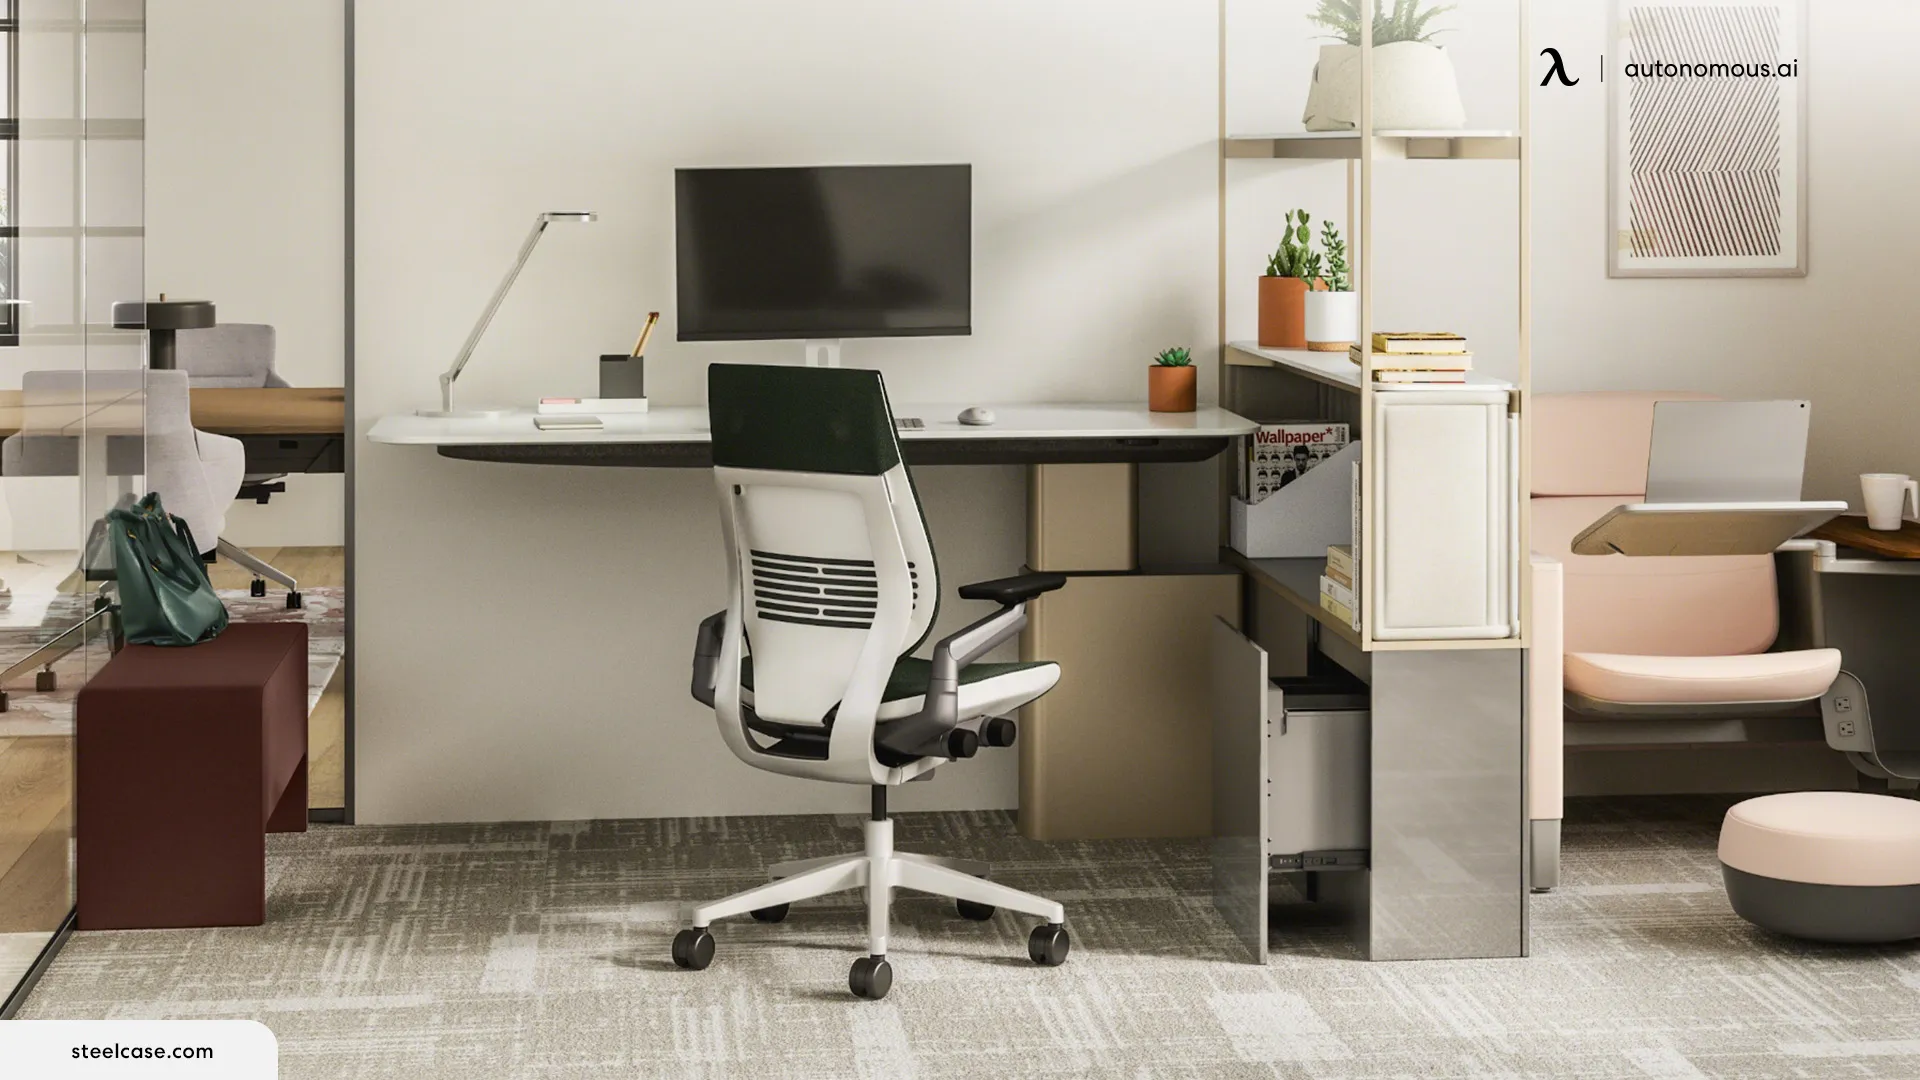 Steelcase Gesture Office Chair - cross-legged office chair with arms